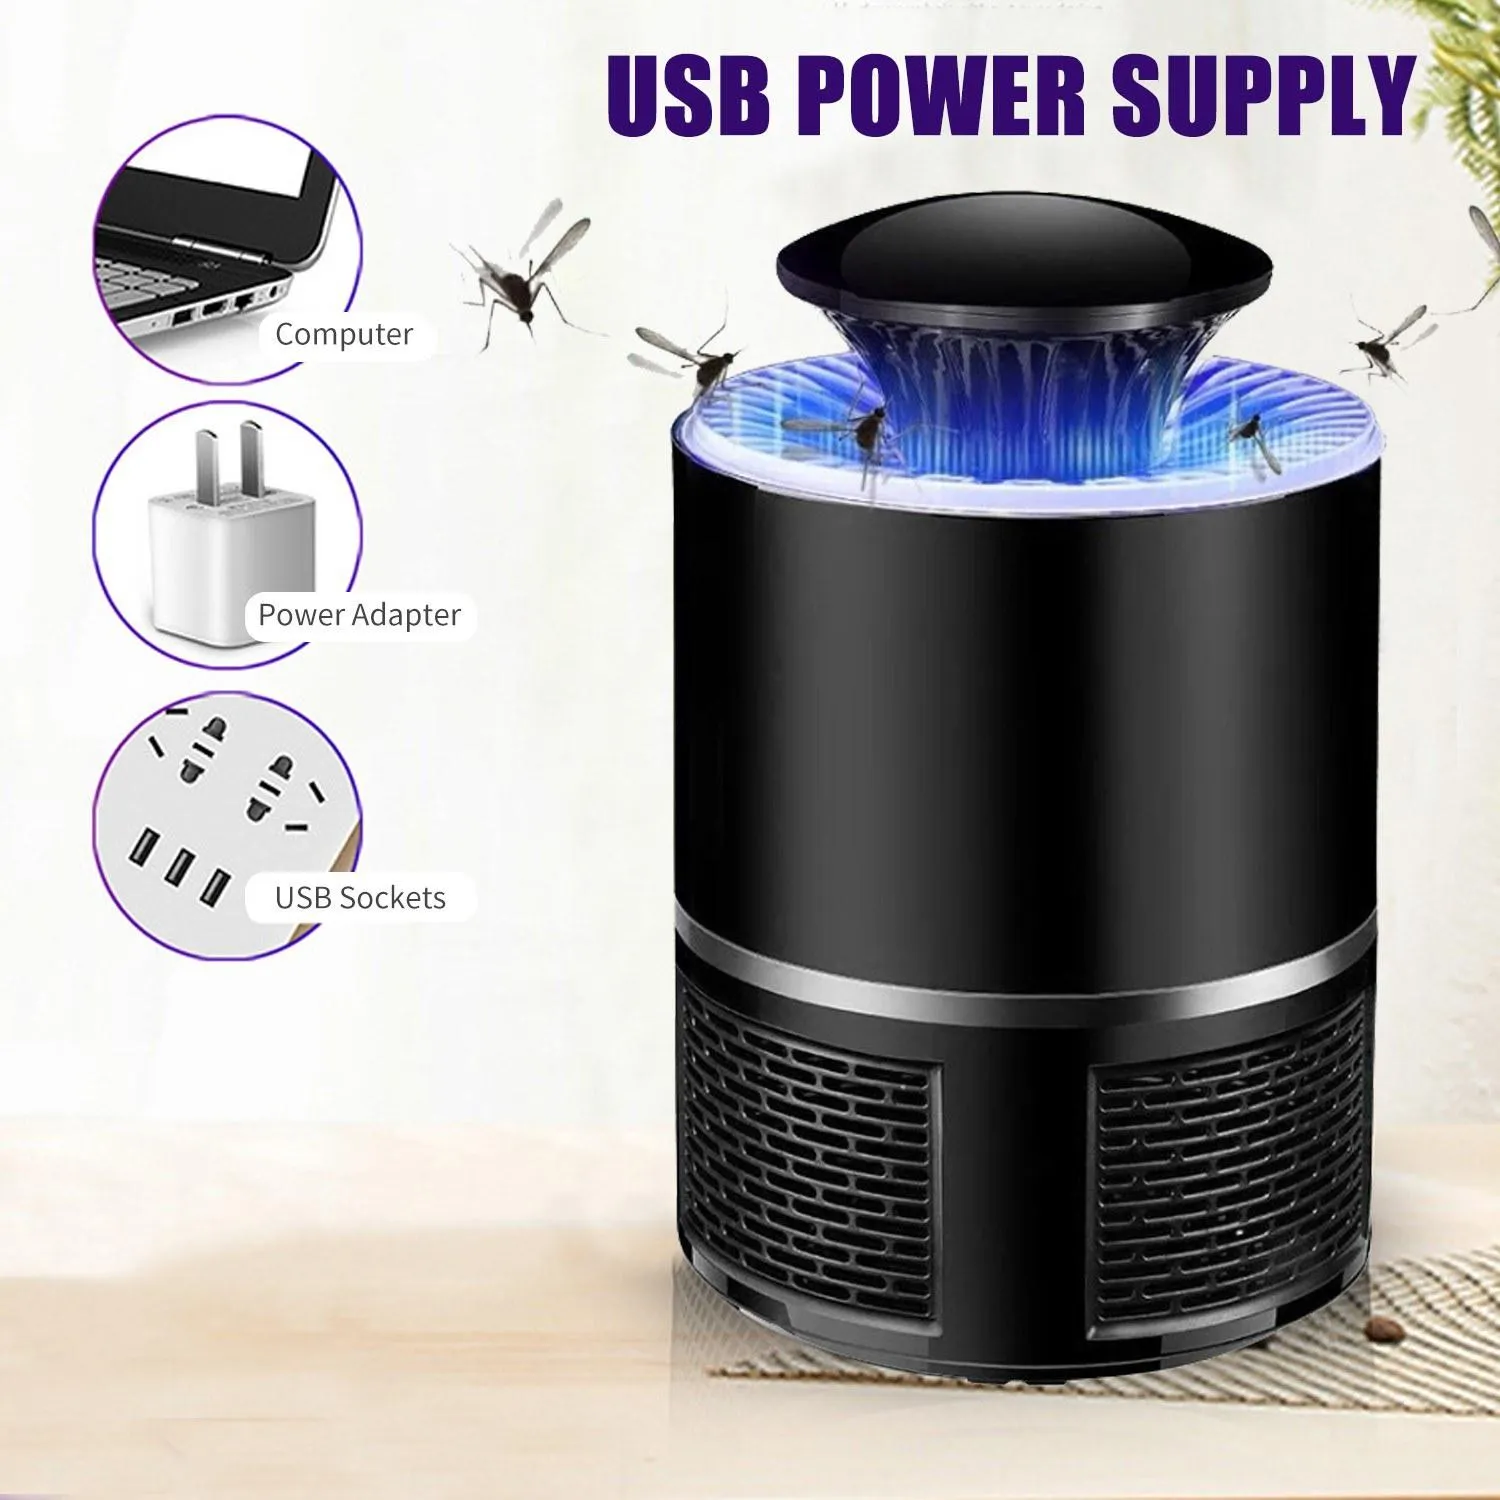 USB Electric Mosquito Killer Lamp Trap Bug Flying Insect Pest Control Zapper Repeller LED Night Light Home Living Room Mosquito Repellent